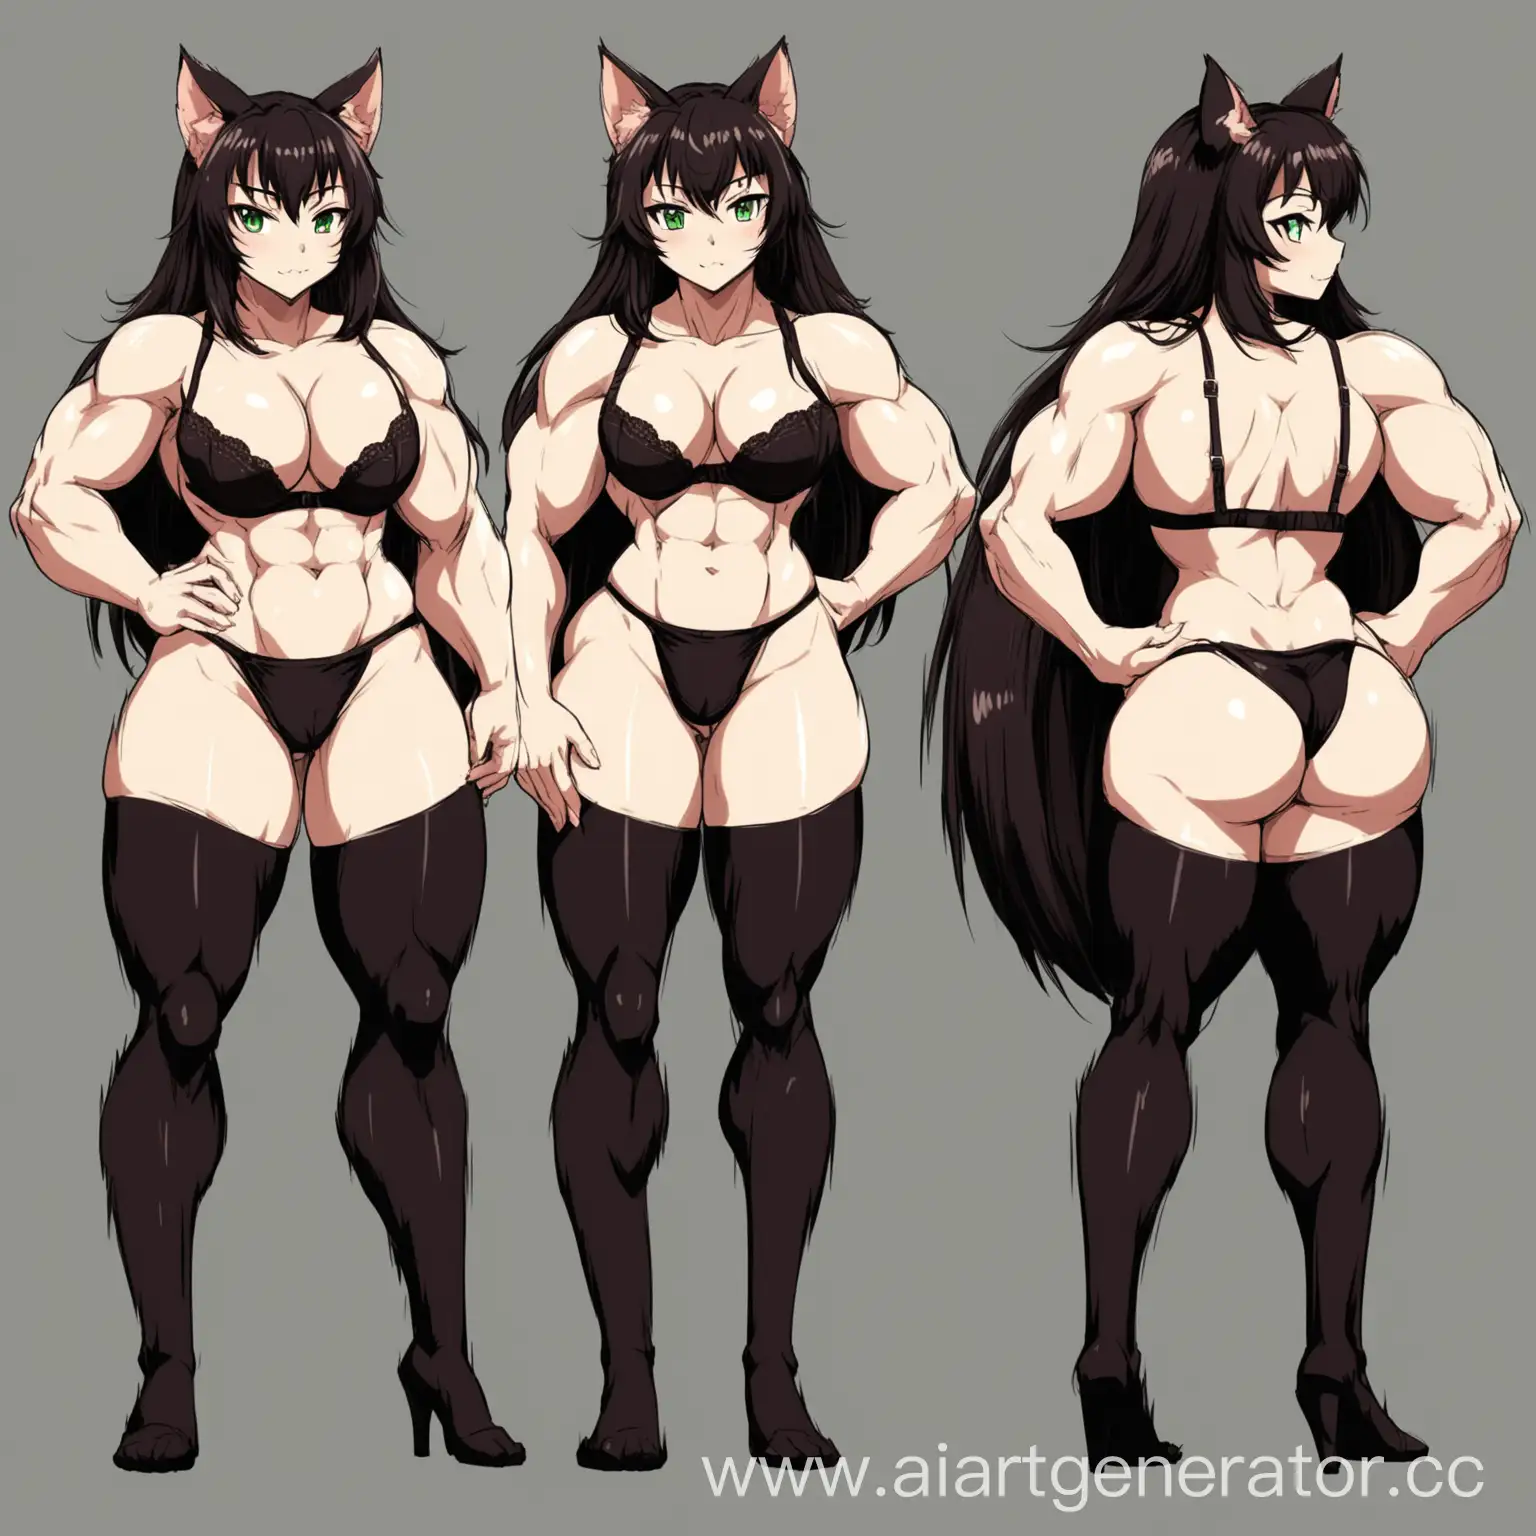 Muscular-Anime-Catgirl-in-Stockings-and-Bra